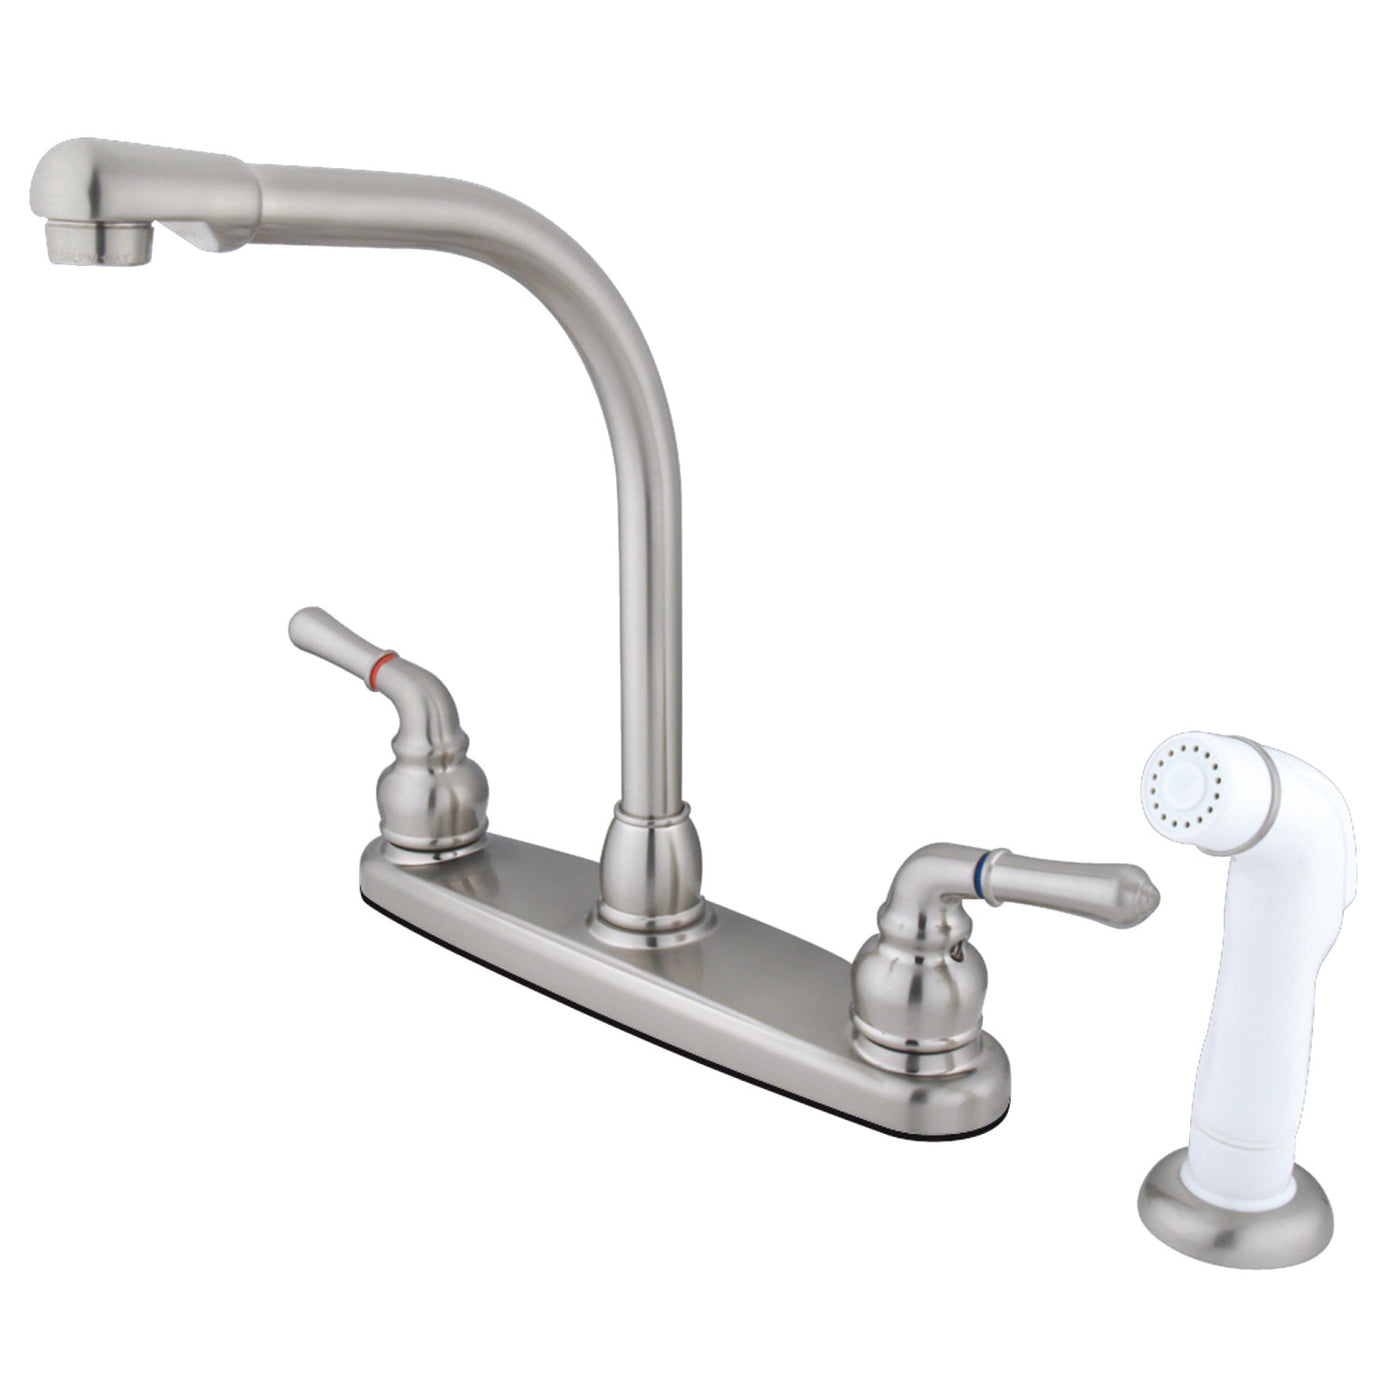 Elements of Design EB758 8-Inch Centerset Kitchen Faucet, Brushed Nickel